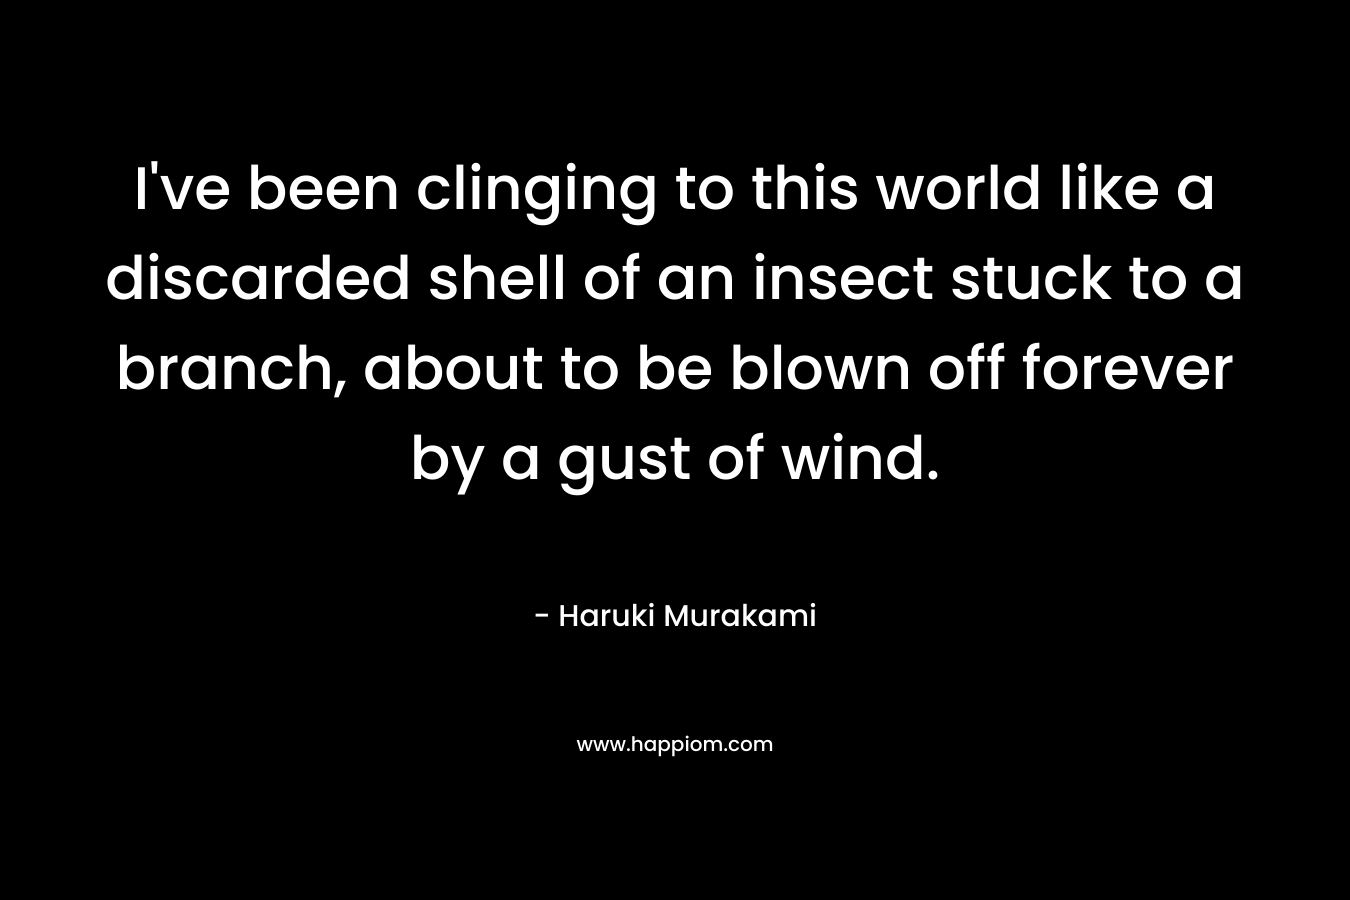 I’ve been clinging to this world like a discarded shell of an insect stuck to a branch, about to be blown off forever by a gust of wind. – Haruki Murakami